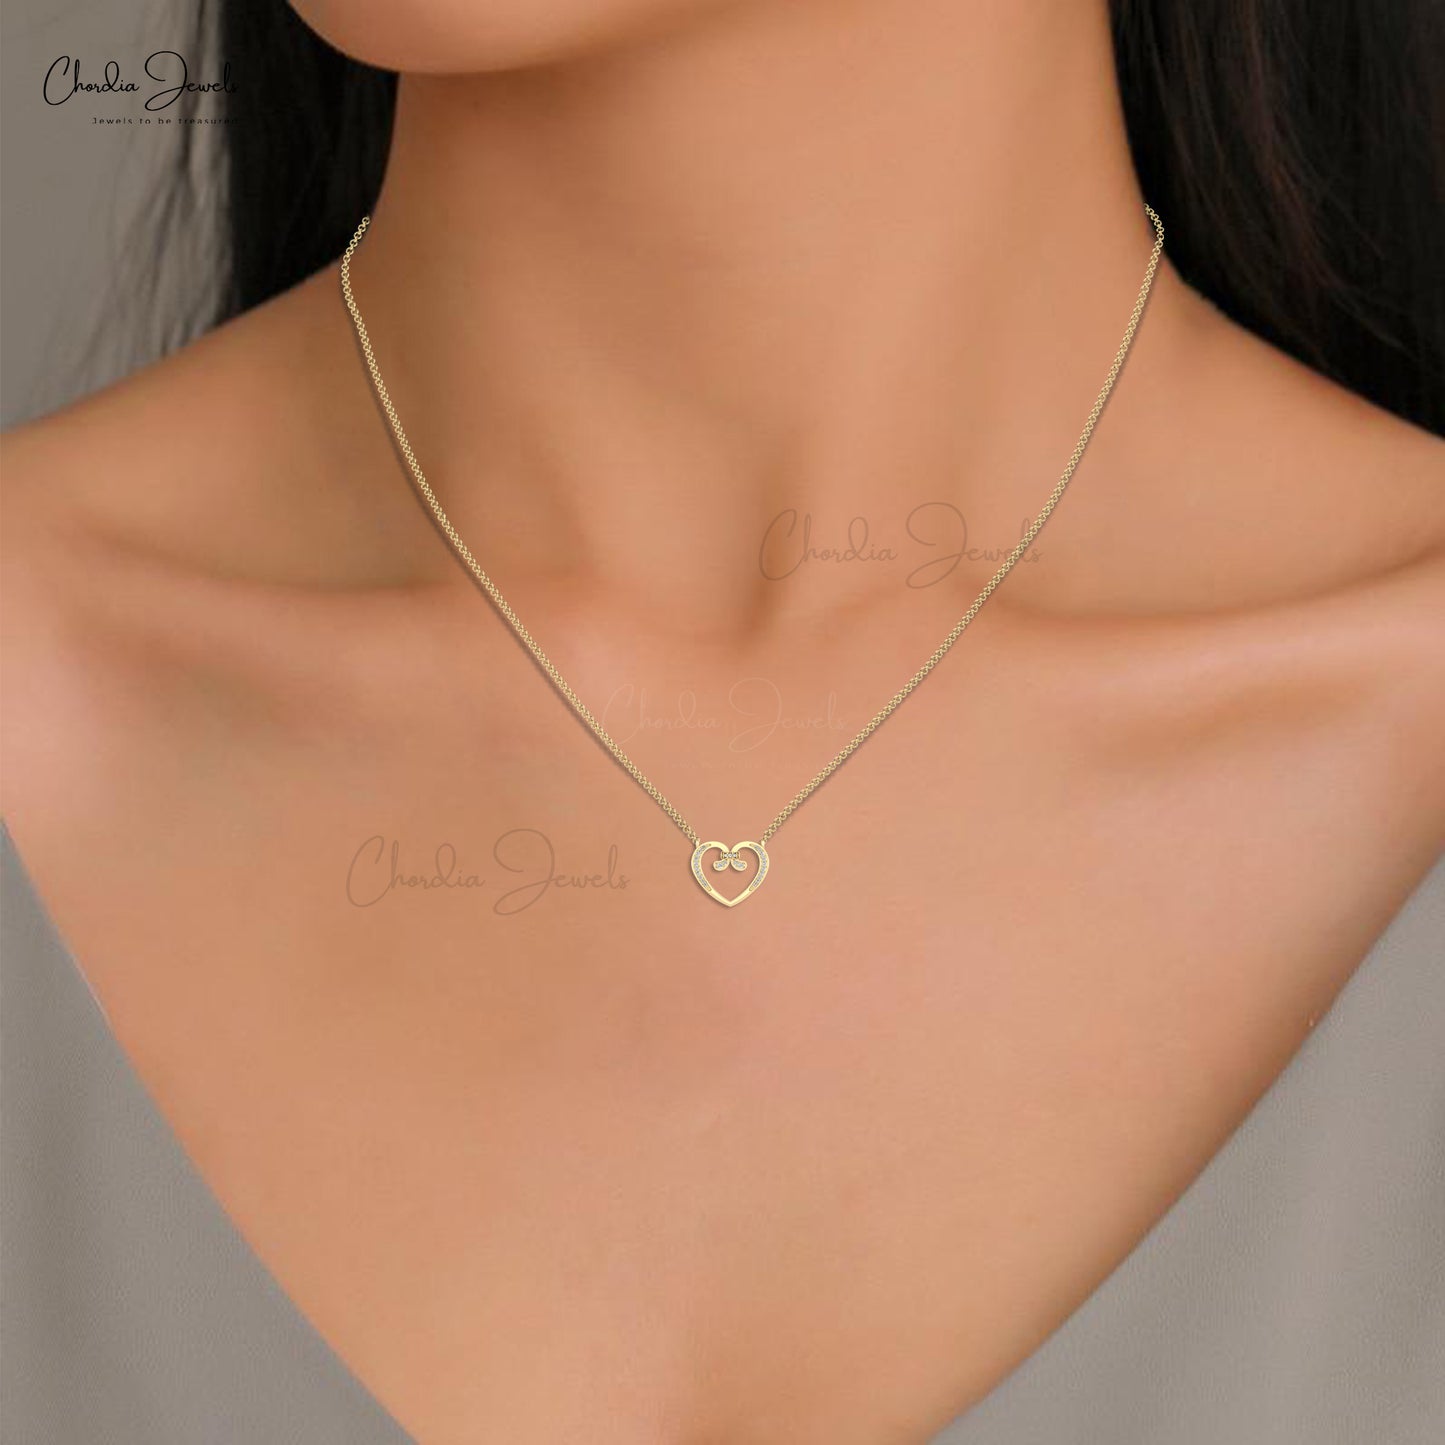 Handmade Open Heart Shaped Necklace Pendant Studded With Natural White Diamonds 14k Solid Gold Necklace Minimalist Jewelry For Wedding Gift